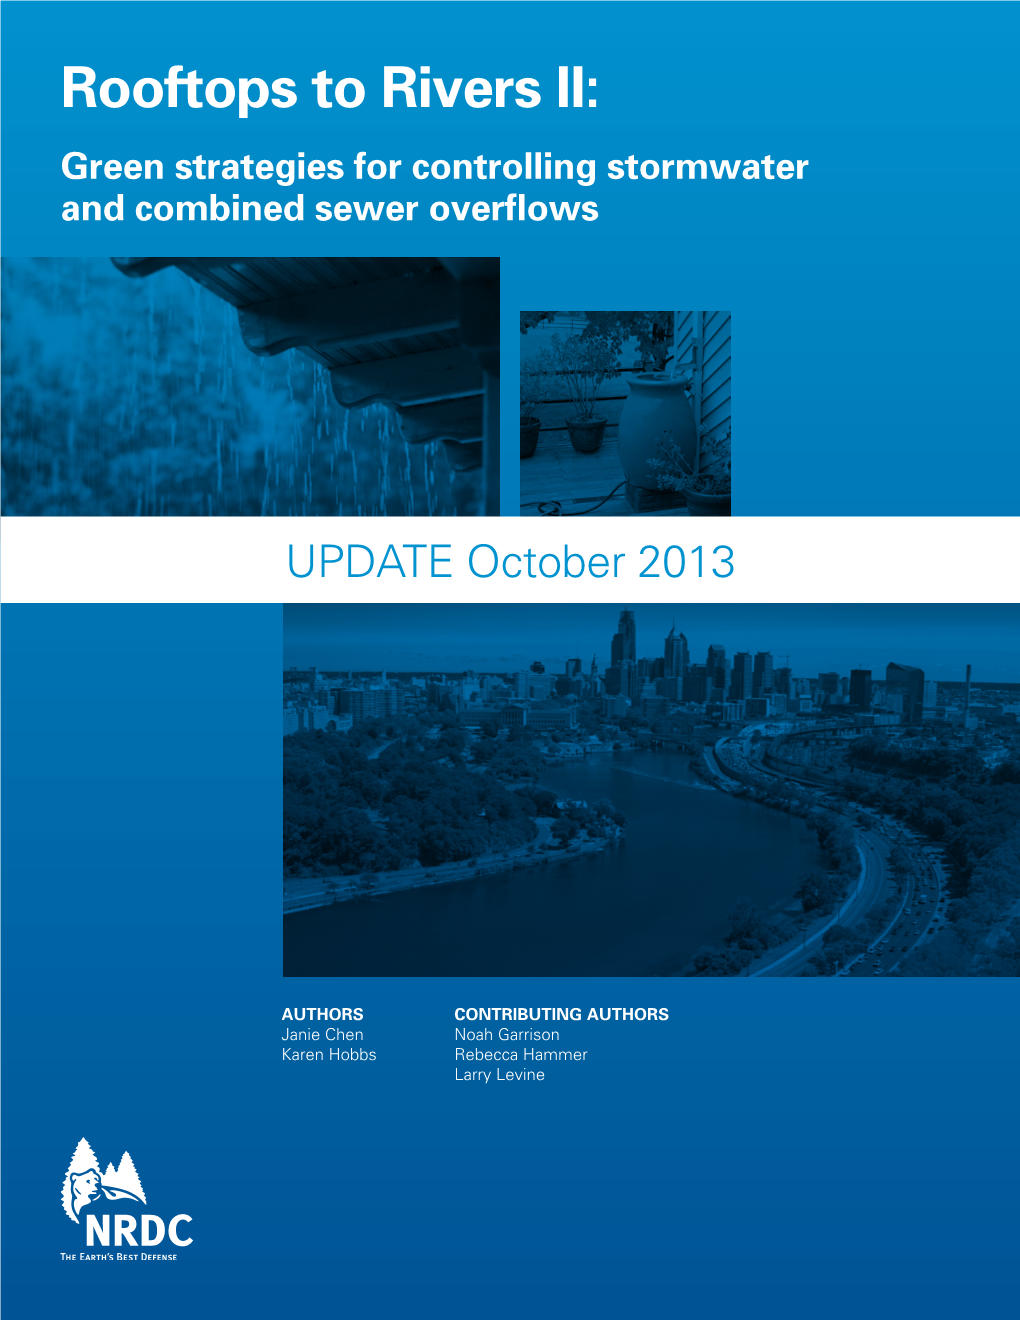 Rooftops to Rivers II: Green Strategies for Controlling Stormwater and Combined Sewer Overflows